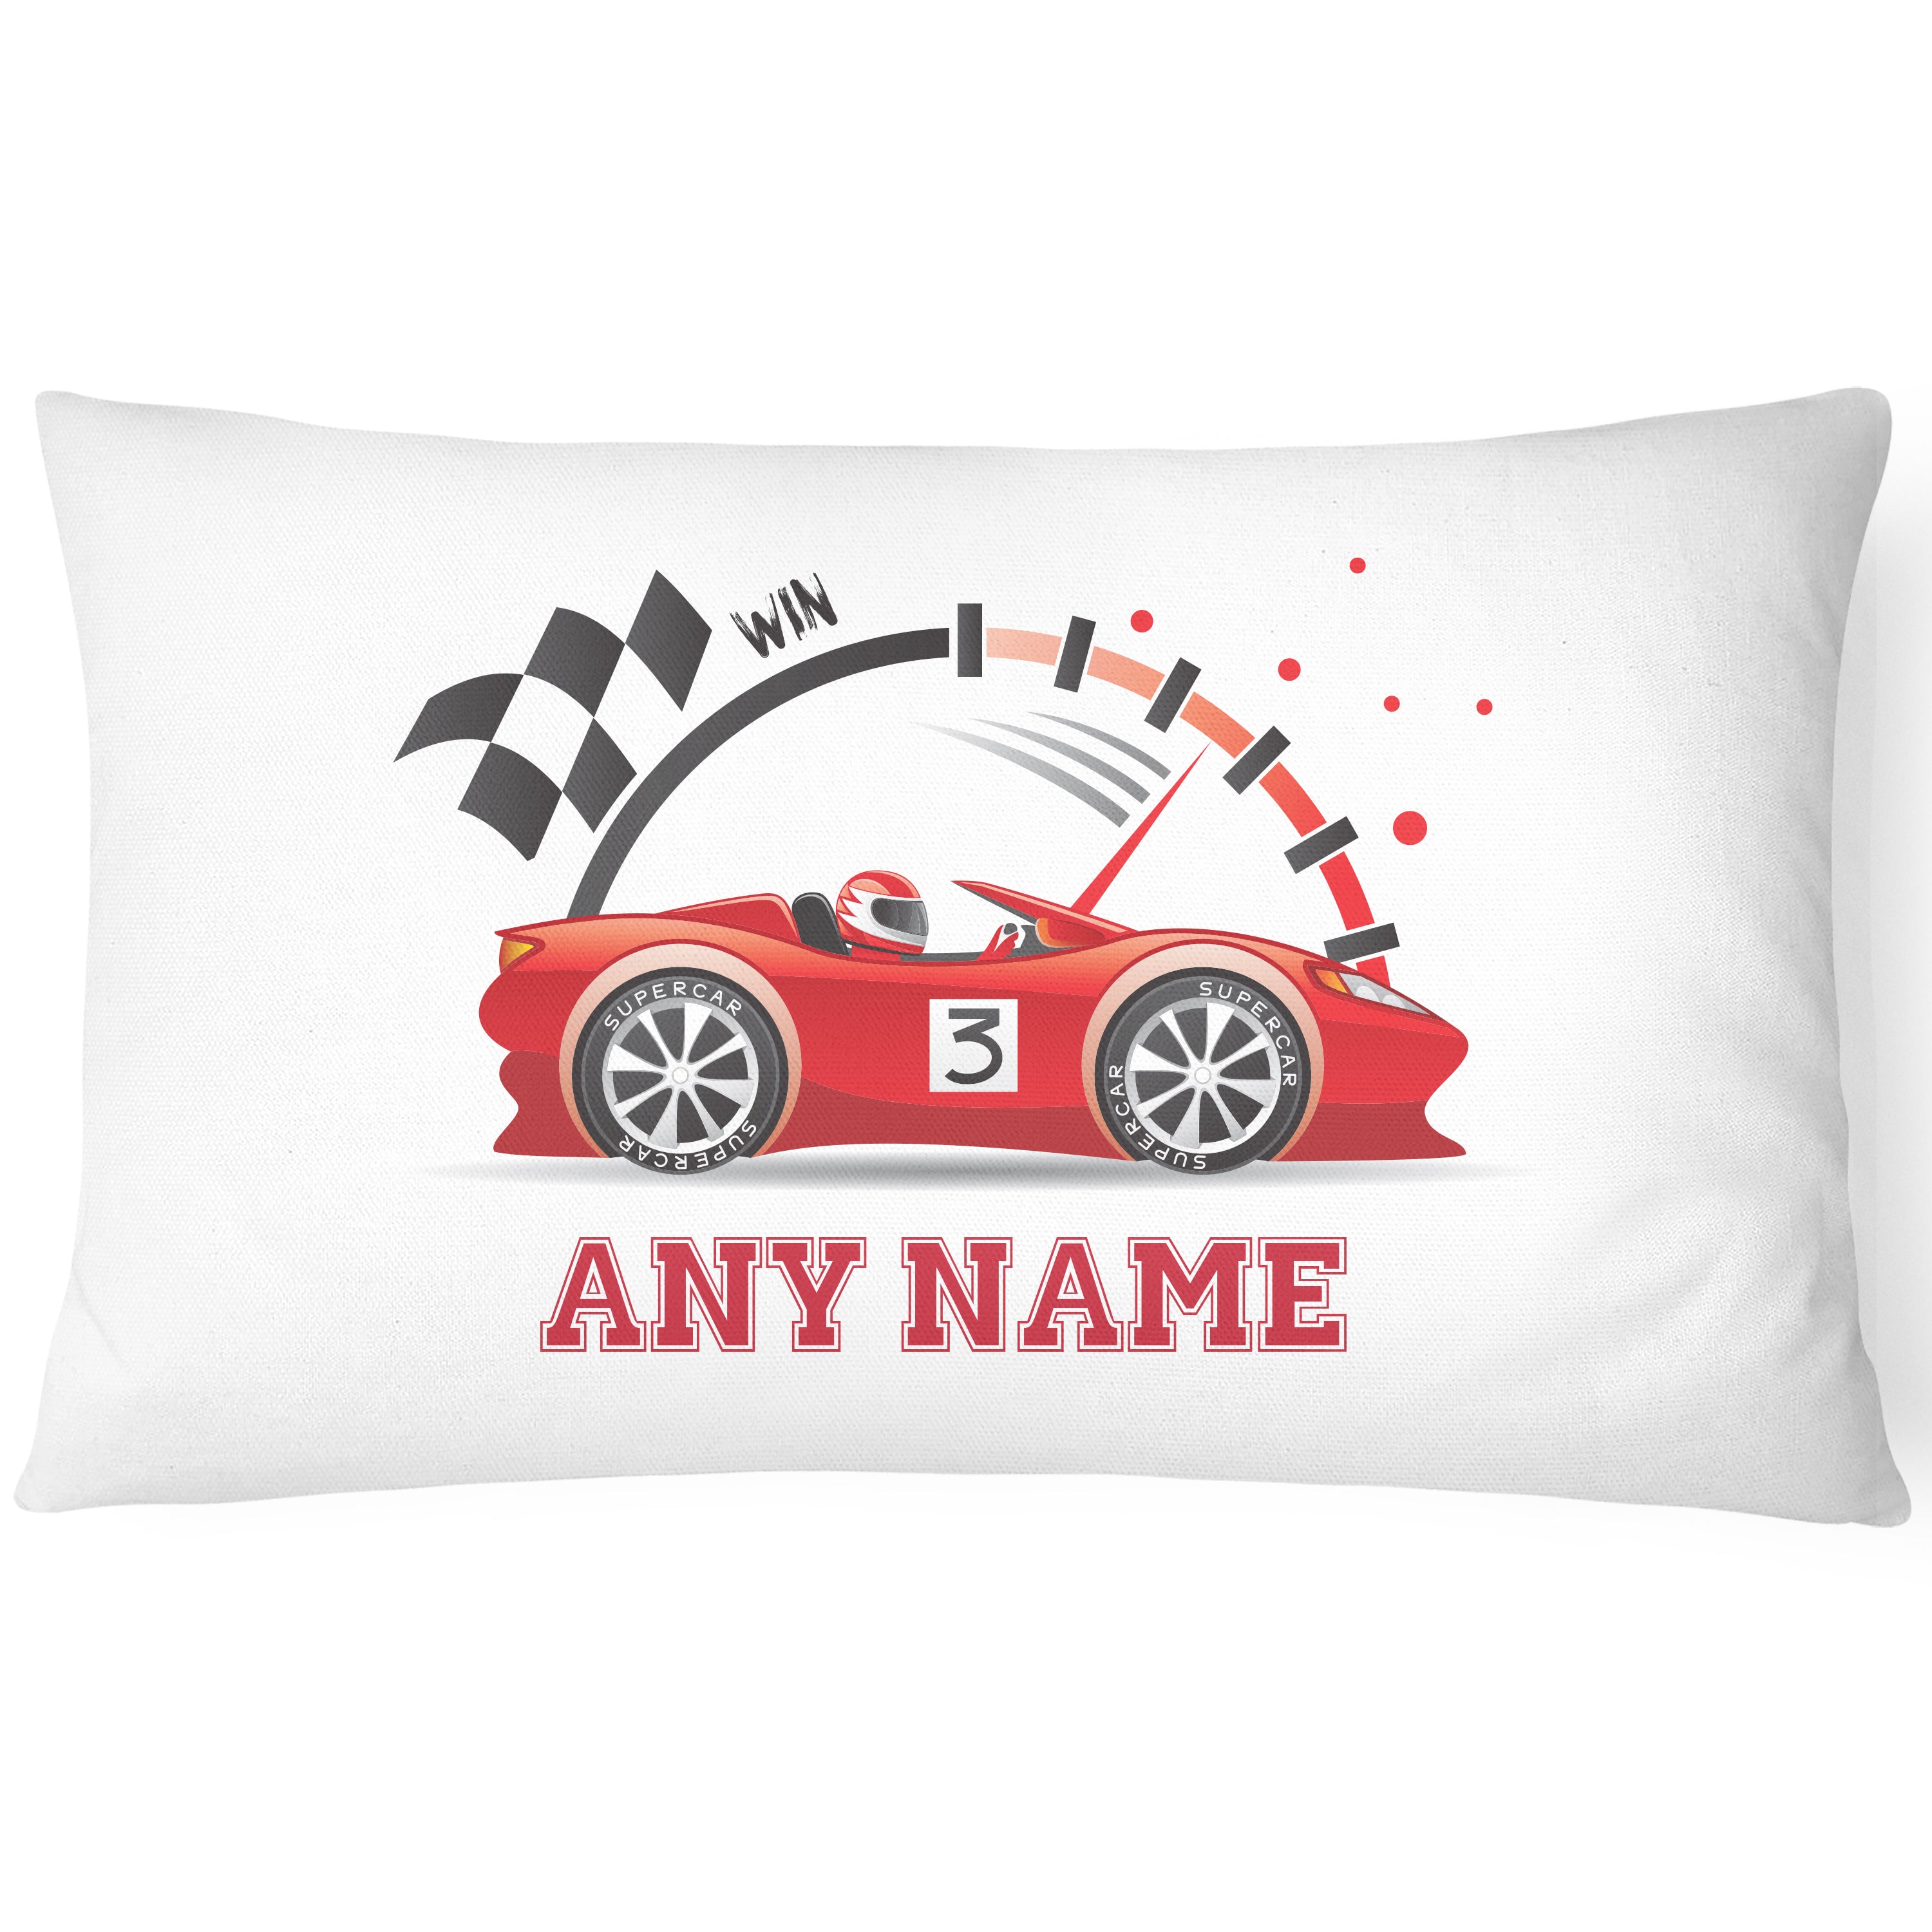 Race Car Pillowcase for Kids - Personalise With Any Name - Perfect Children's Gift - Red